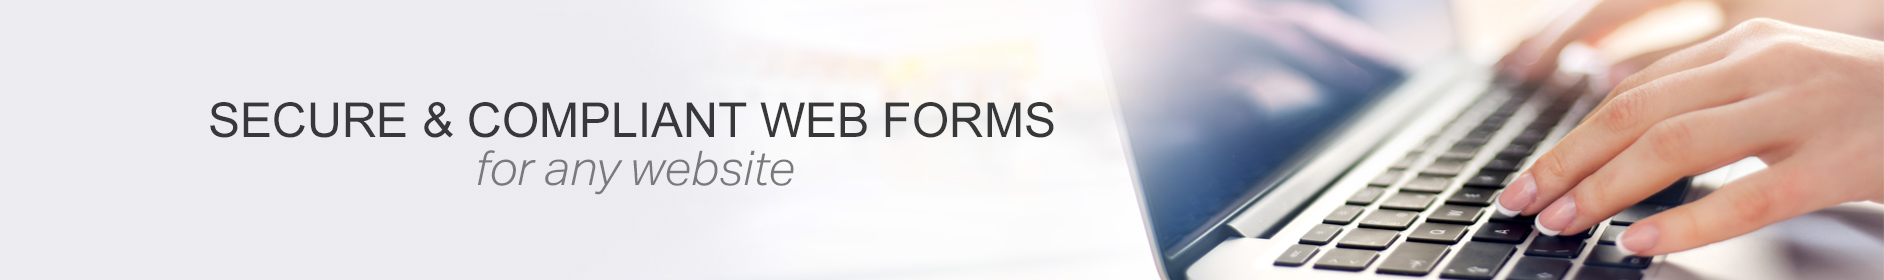 secure web forms